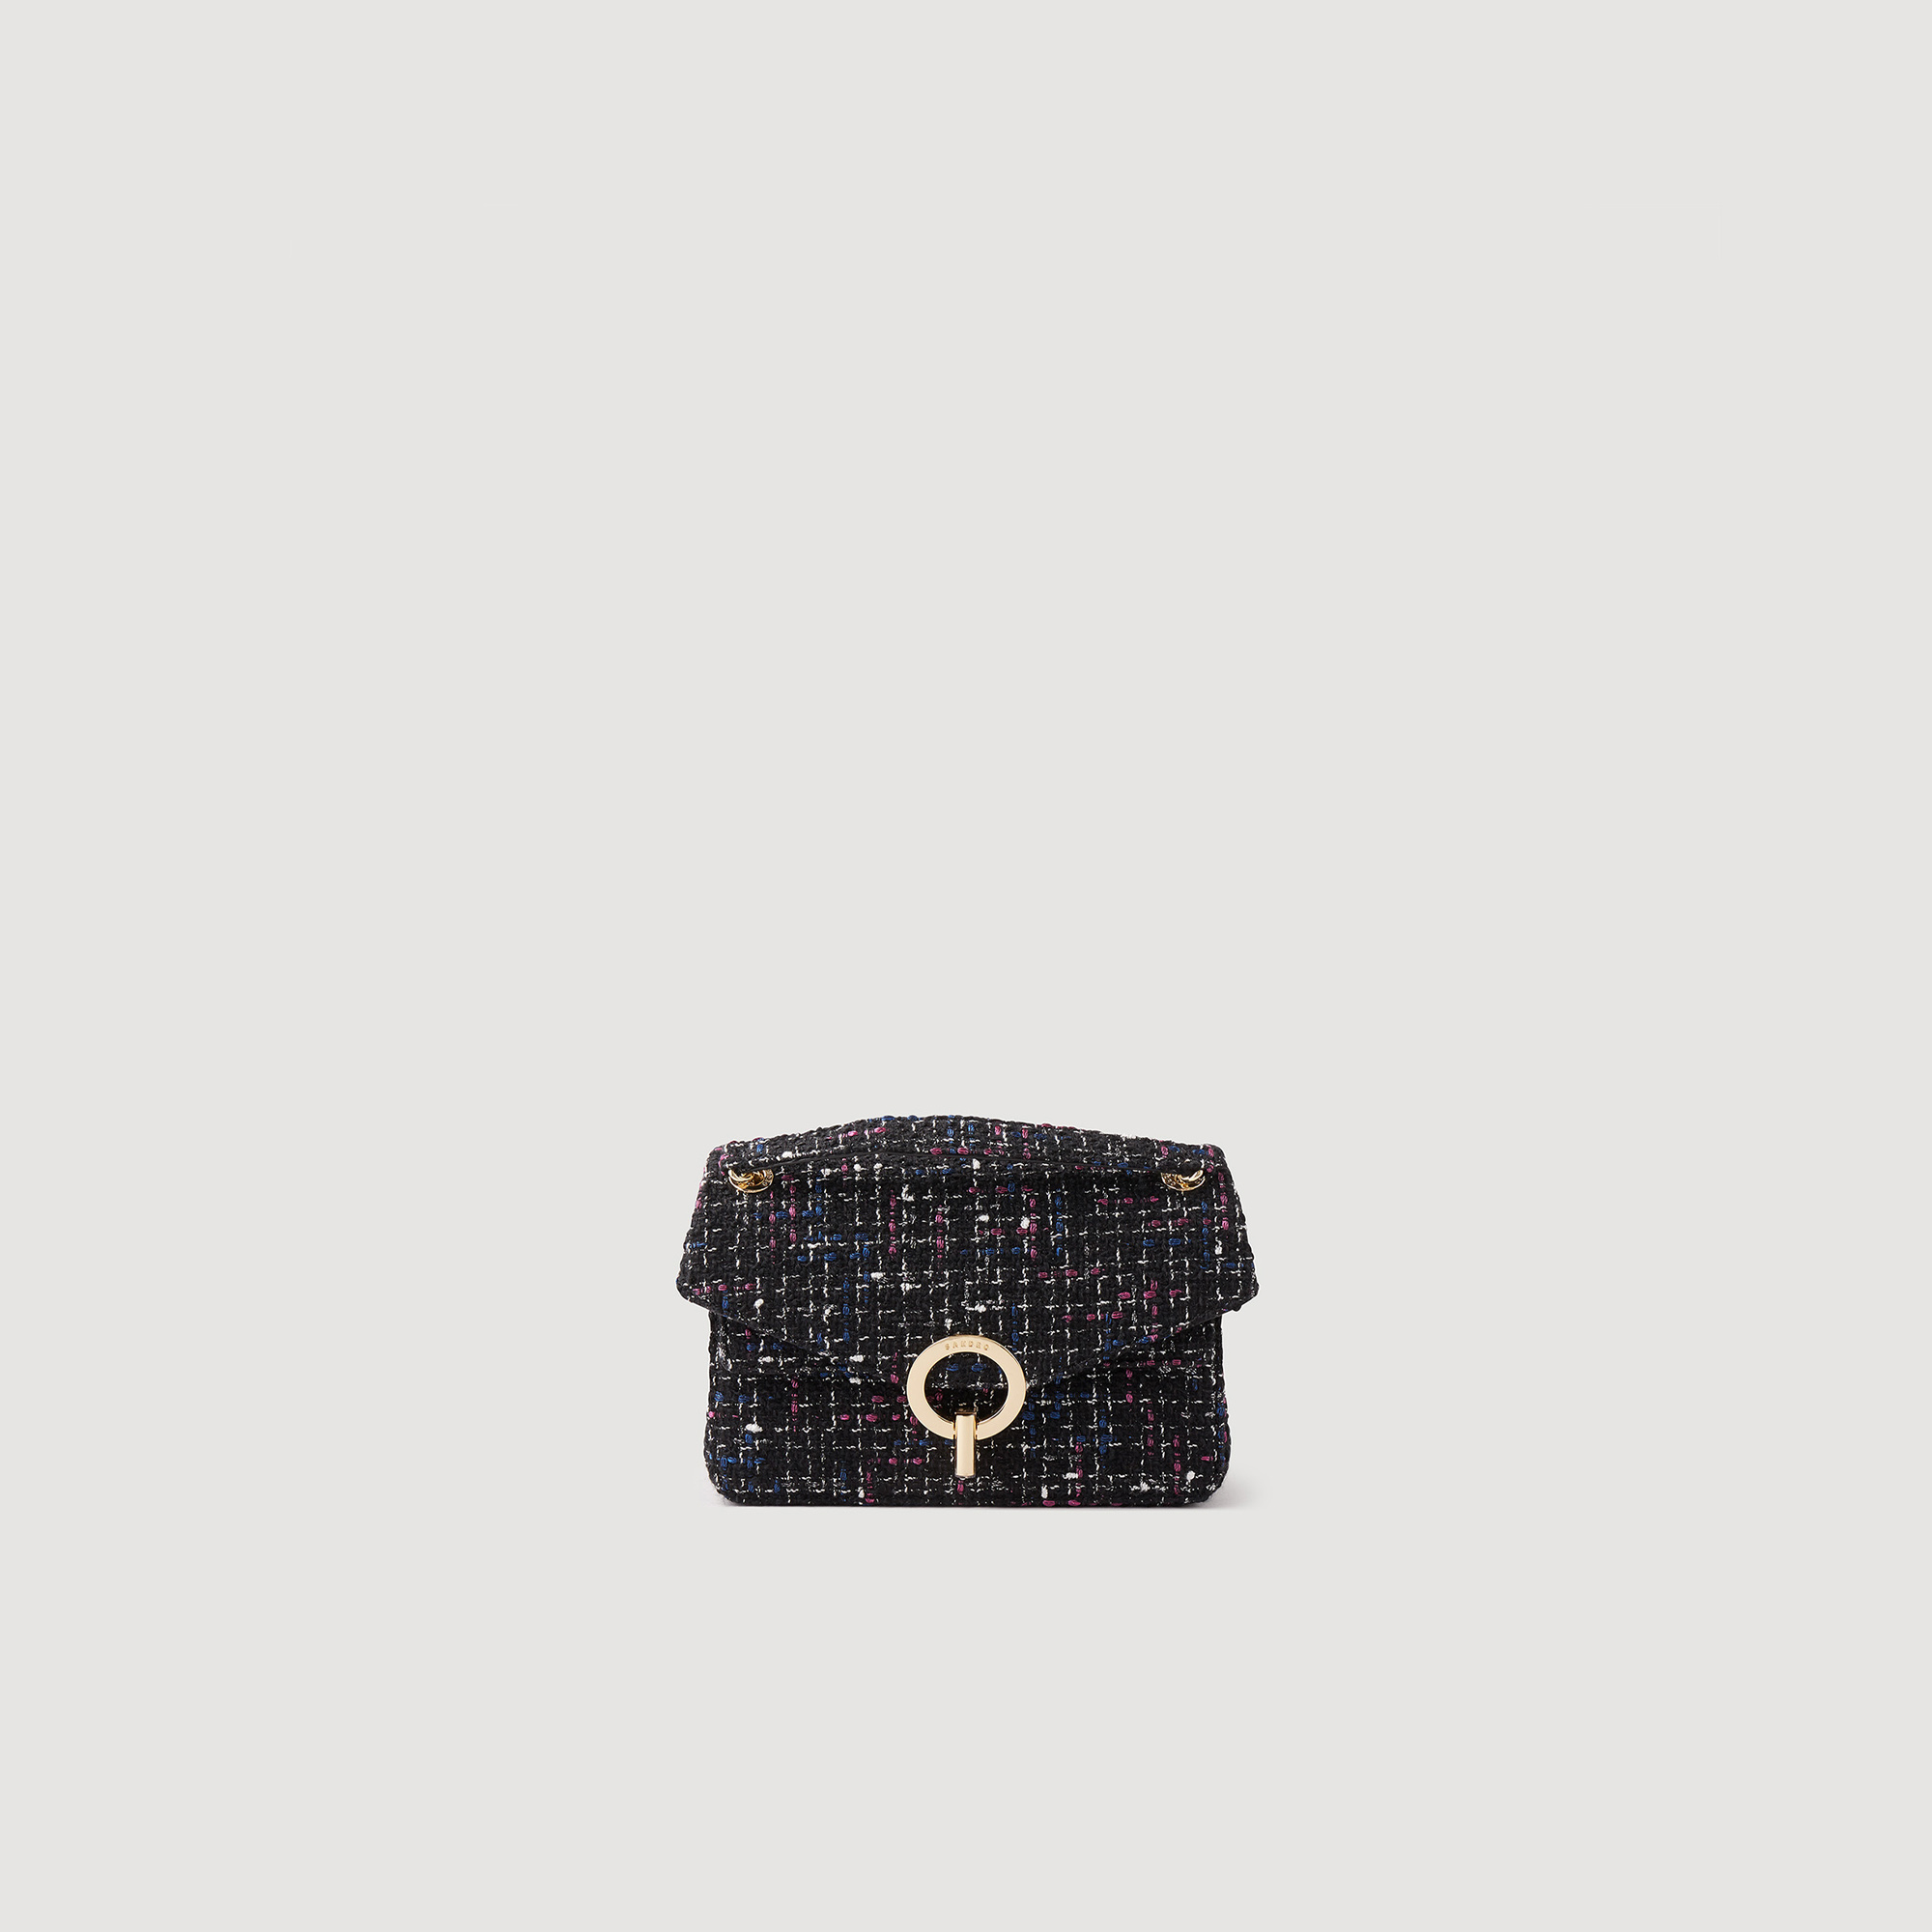 Sandro cotton The classic YZA bag is now available in a tweed version